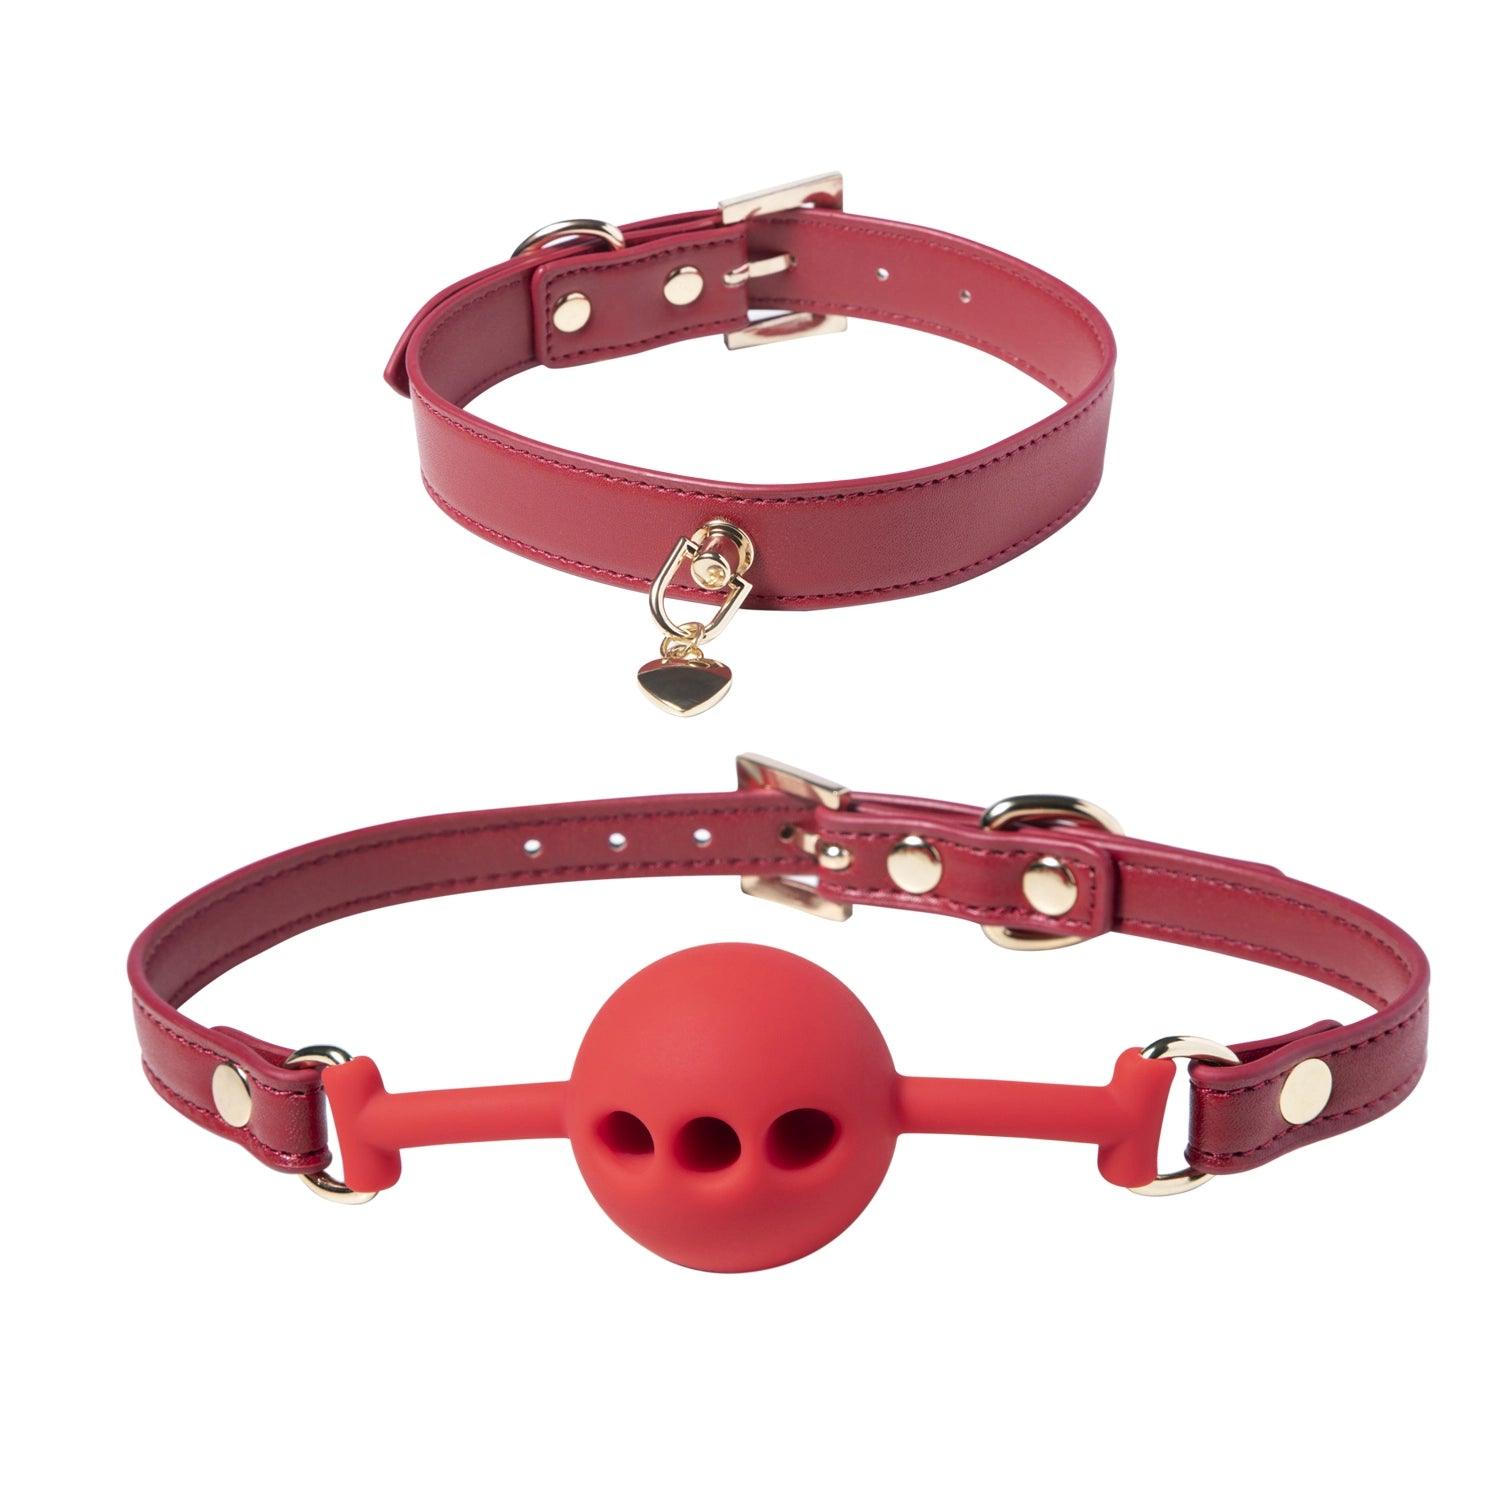 RED PASSION 8 Piece Vegan Leather Bondage Kit - Honey Play Box Official